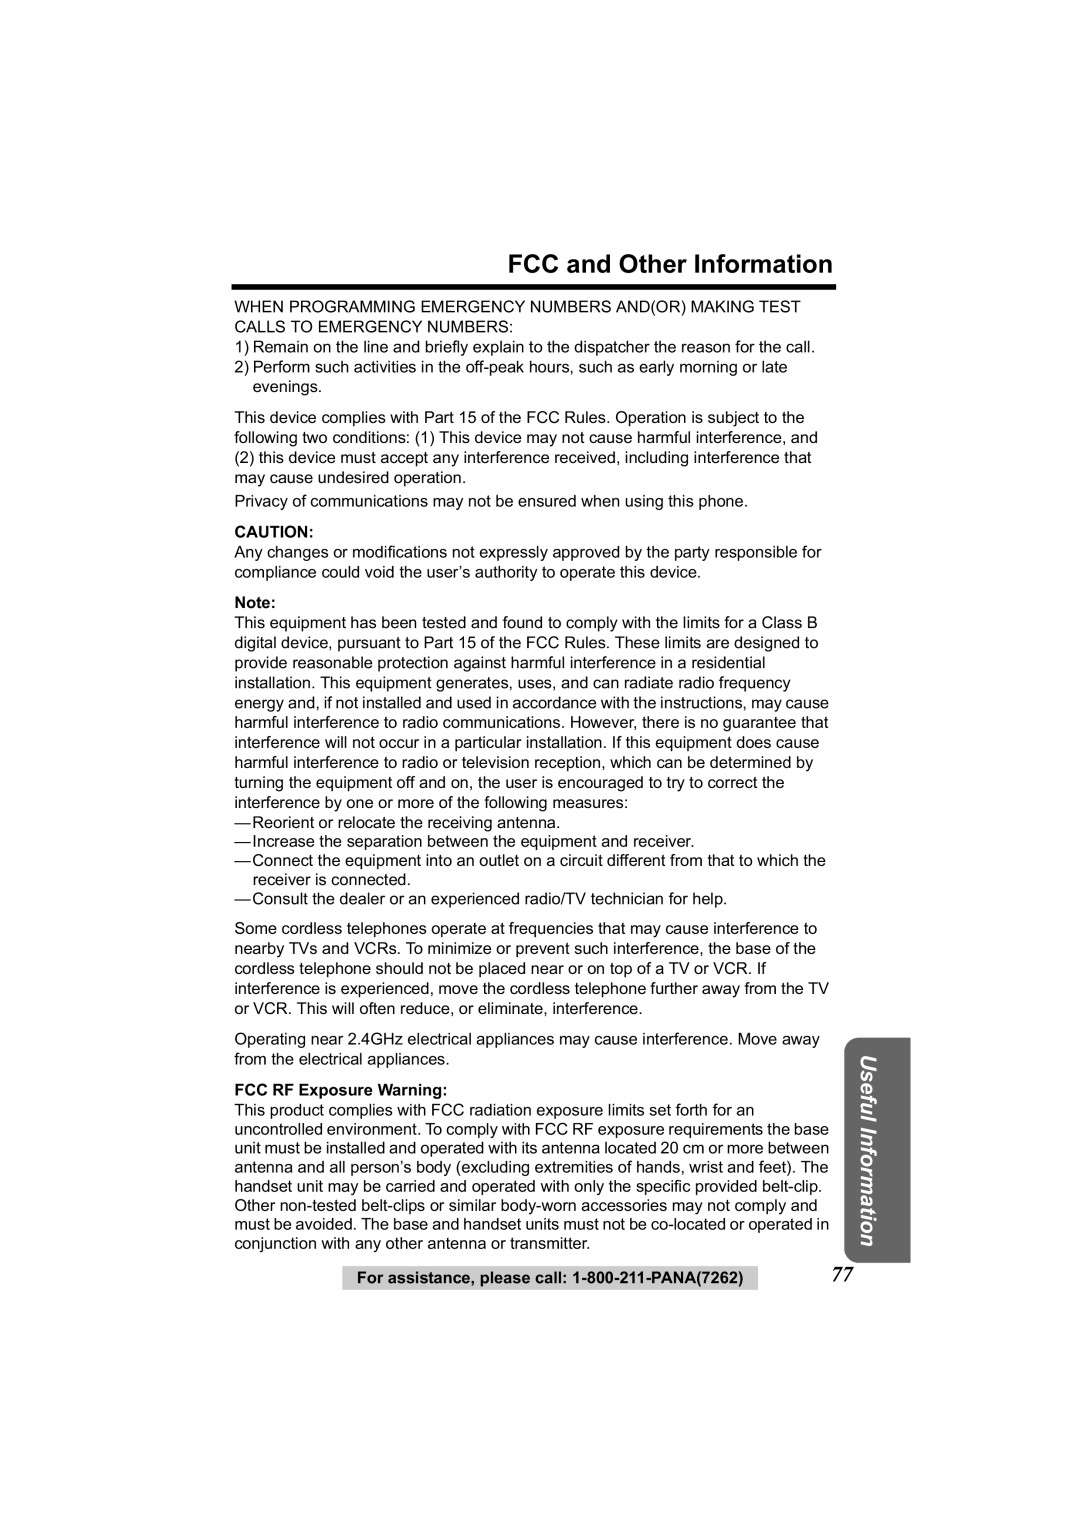 Panasonic KX-TG2344 manual FCC and Other Information, FCC RF Exposure Warning 